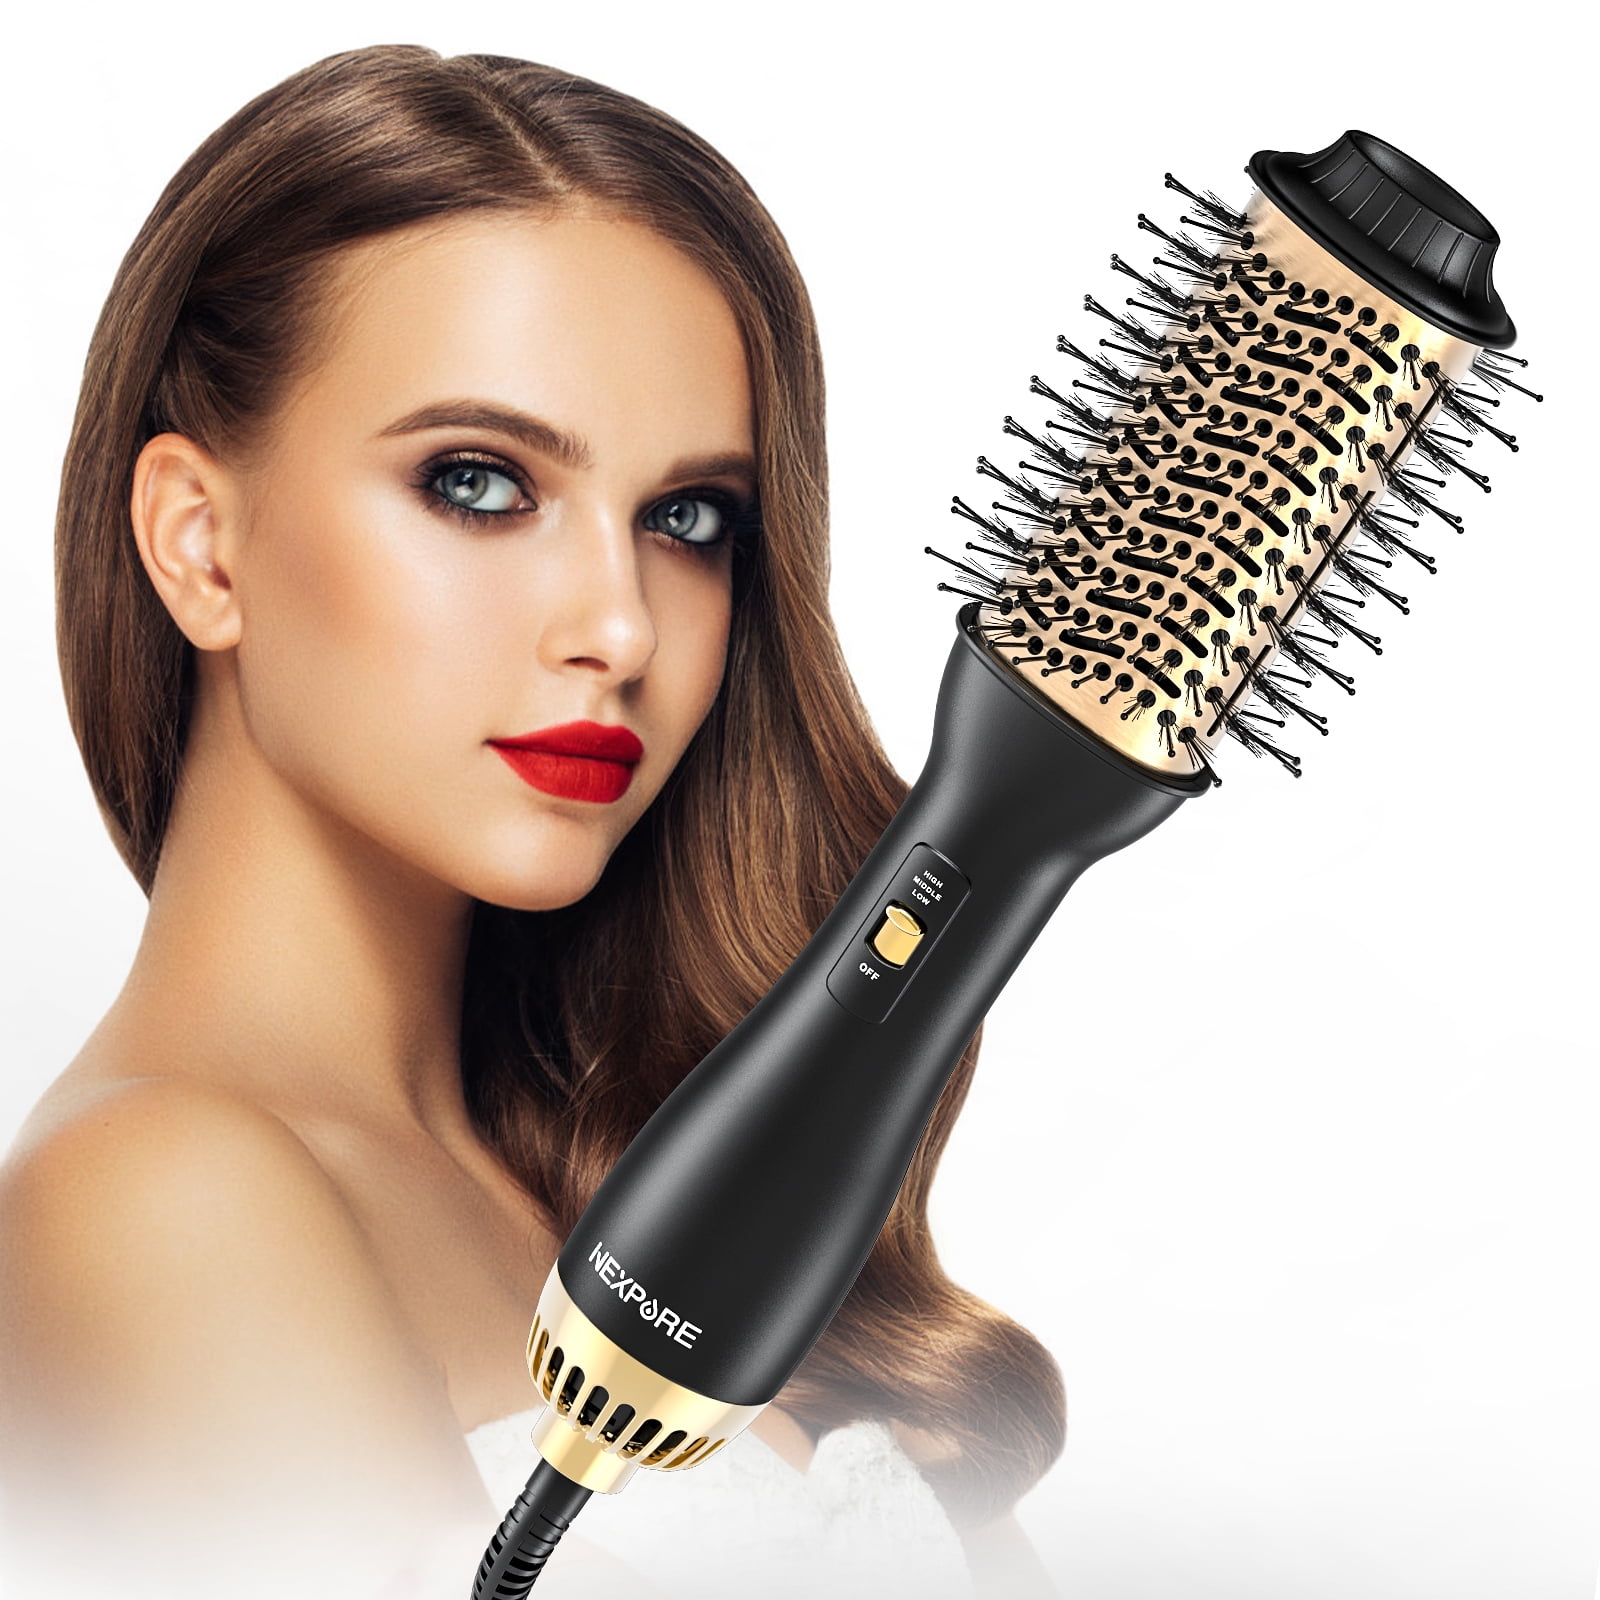 Glowserie Hair Dryer Brush4 in 1 Hot Air Hair Brush CombBlow Dryer BrushOne  Step Hair Dryer and StylerNegative Ion Hair Dryer with Curlers and  Straighteners  JioMart